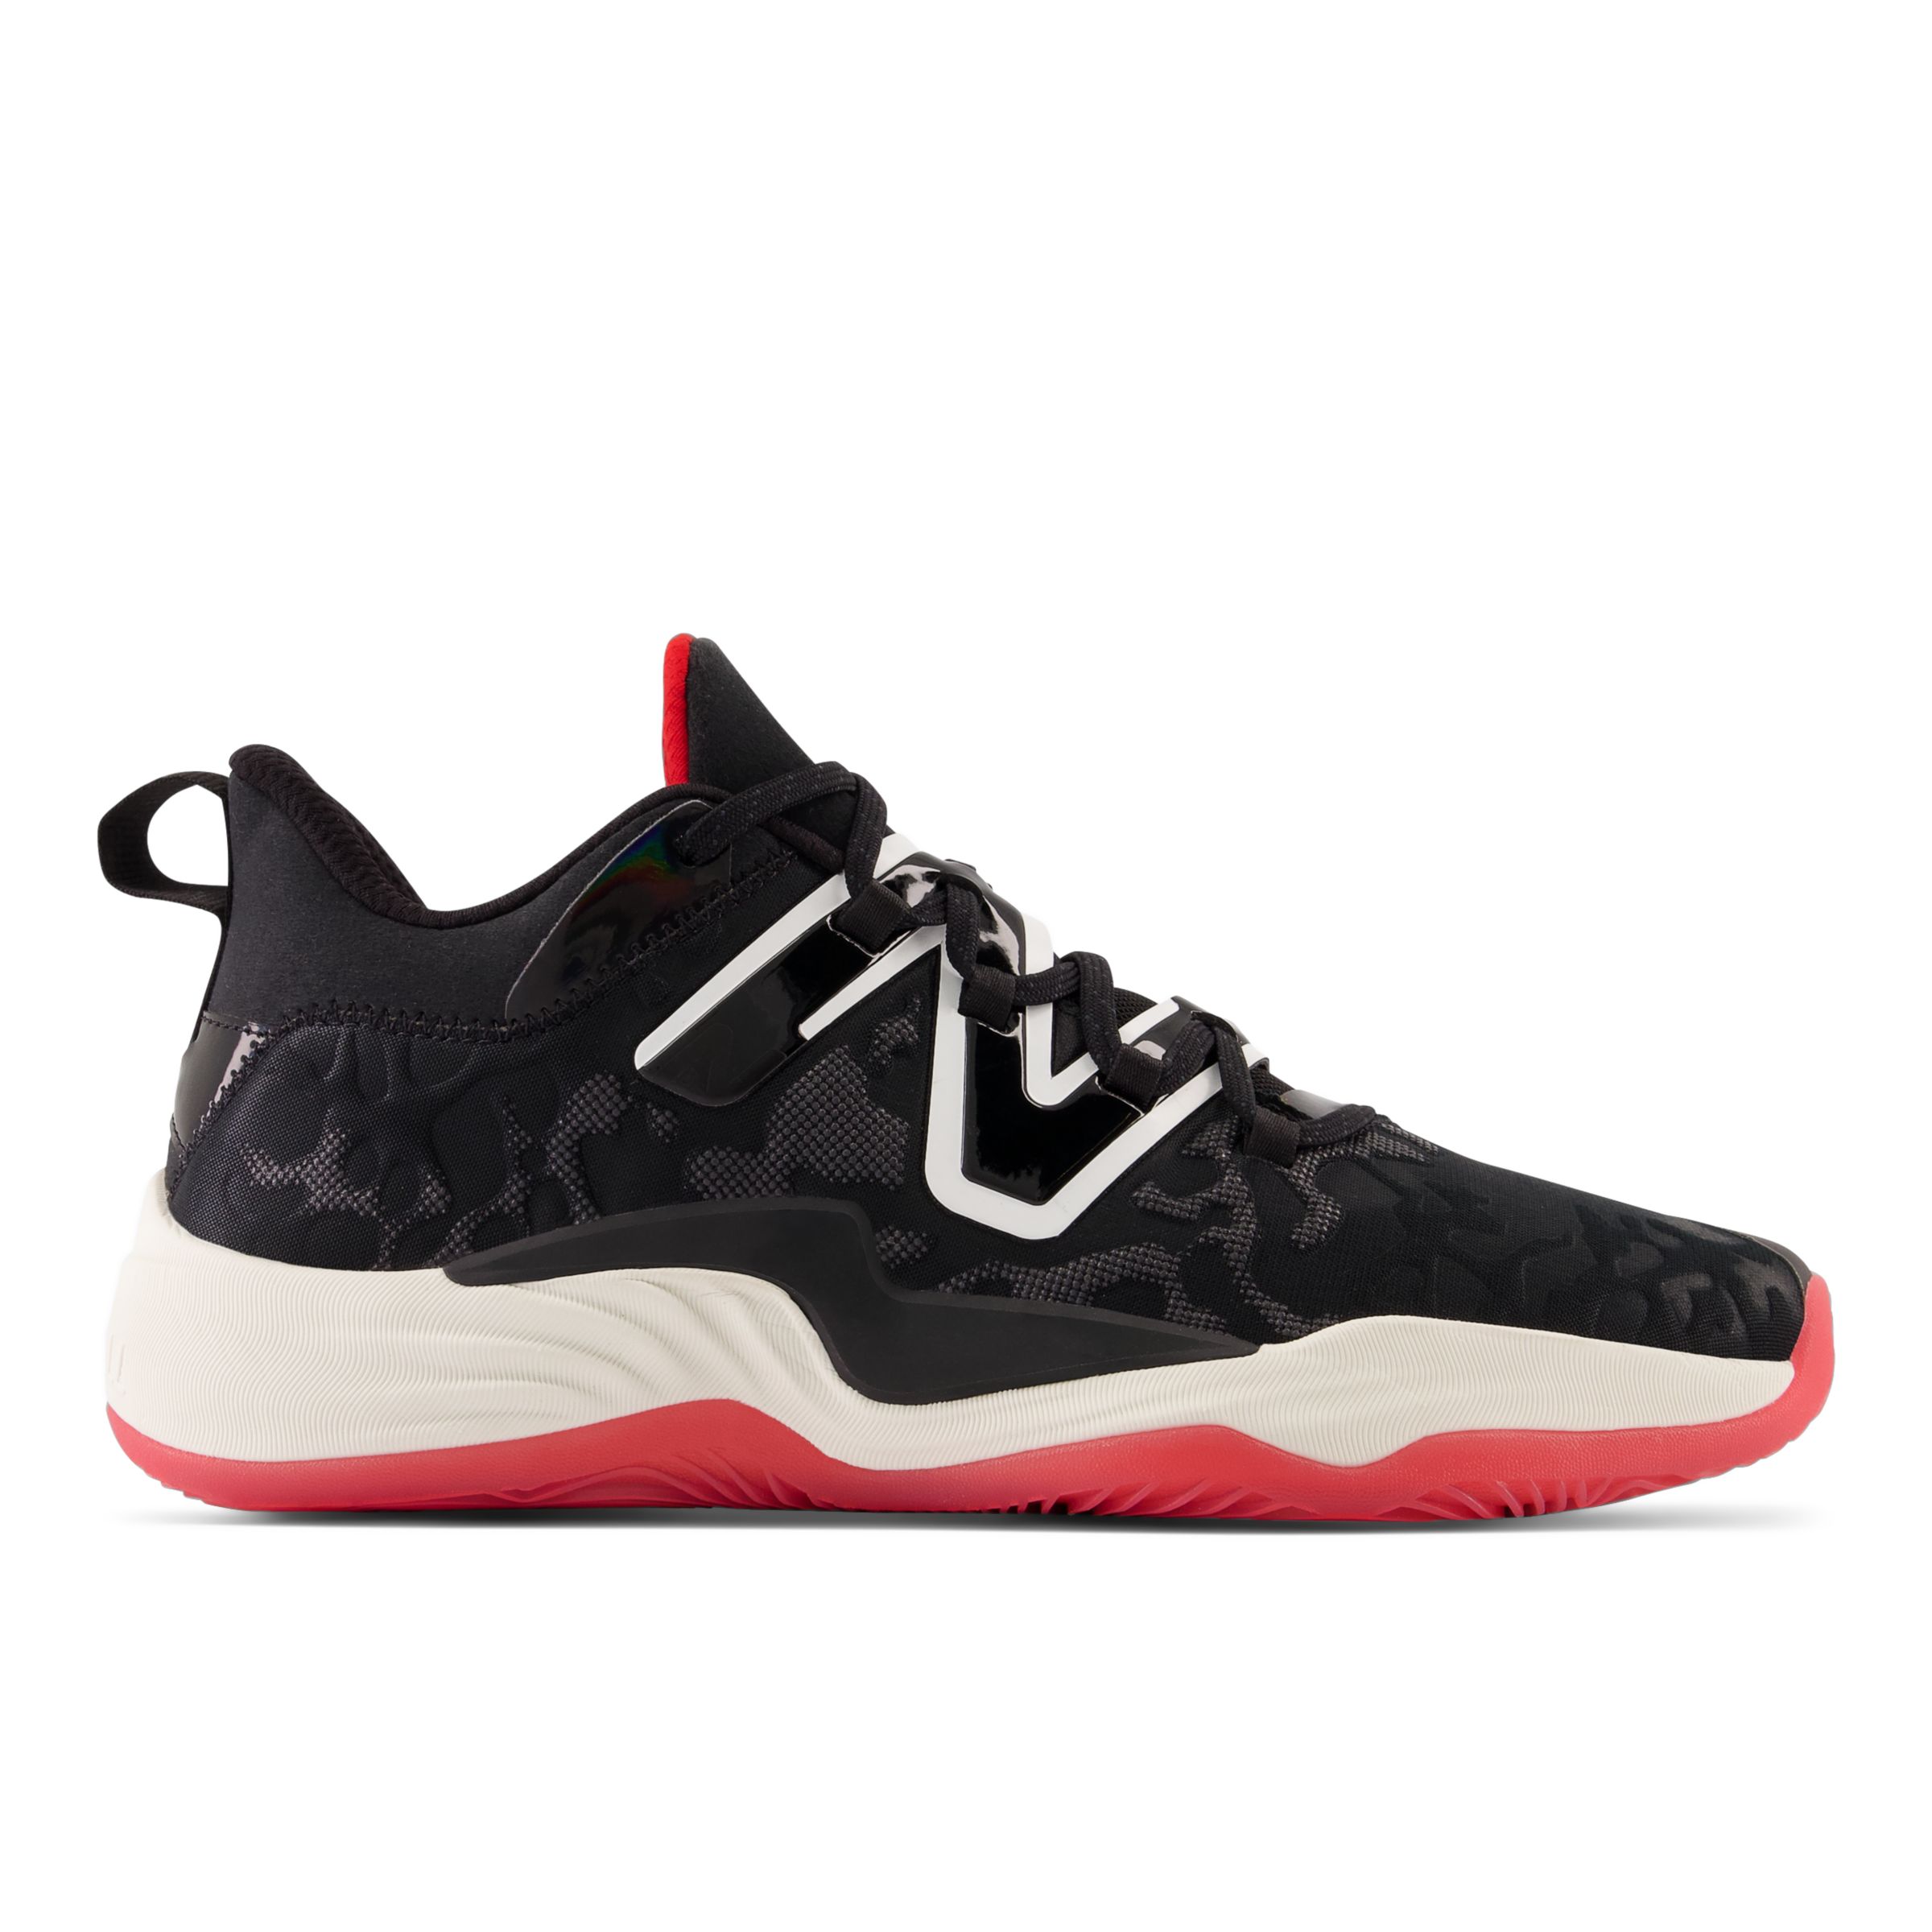 

New Balance Unisex TWO WXY v3 Black/Red - Black/Red